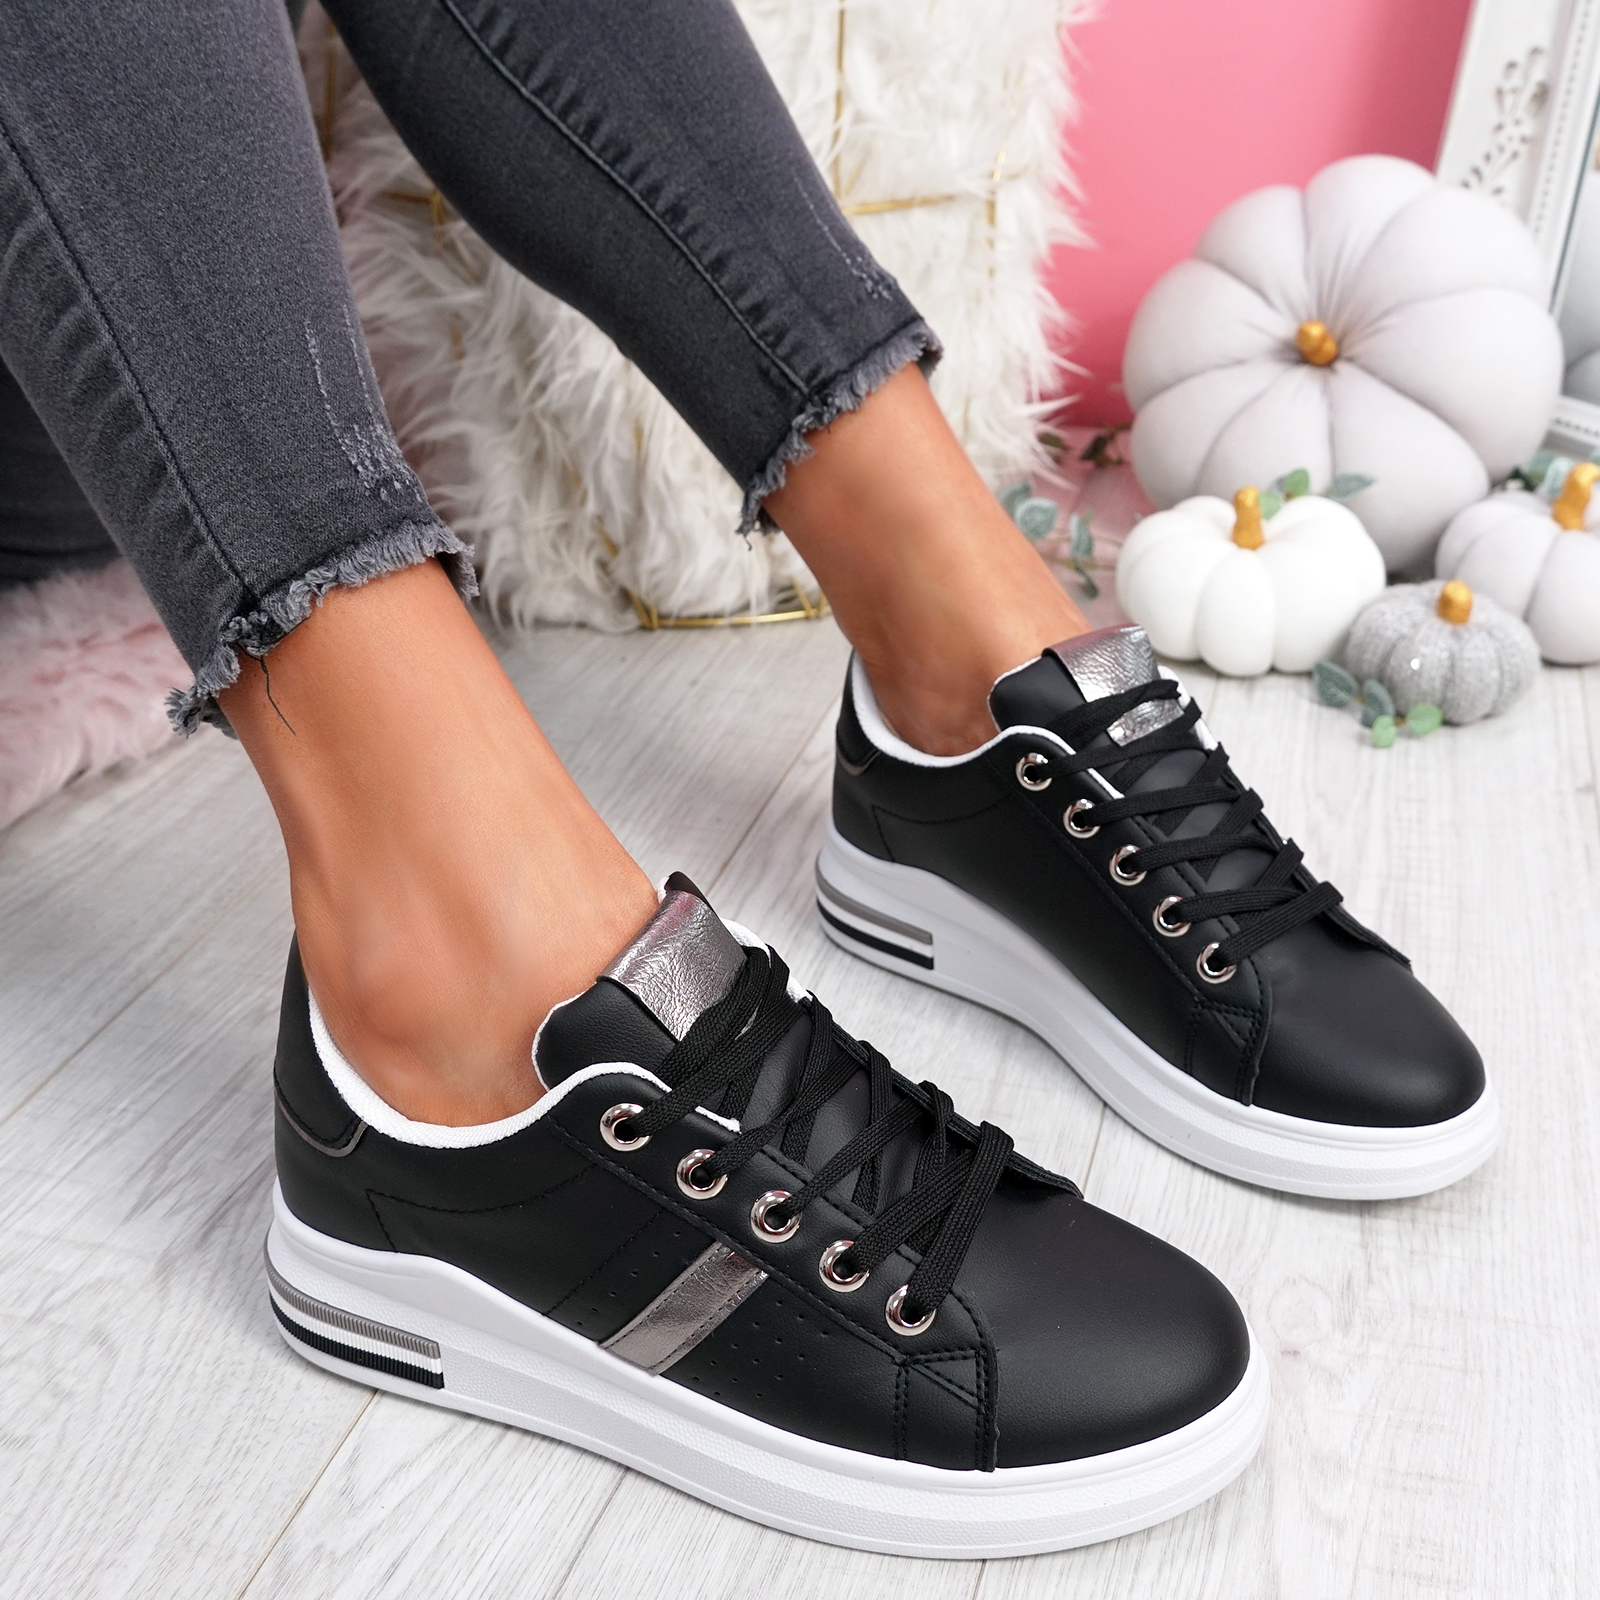 WOMENS LADIES LACE UP TRAINERS TWO TONE SNEAKERS PLIMSOLLS WOMEN SHOES ...